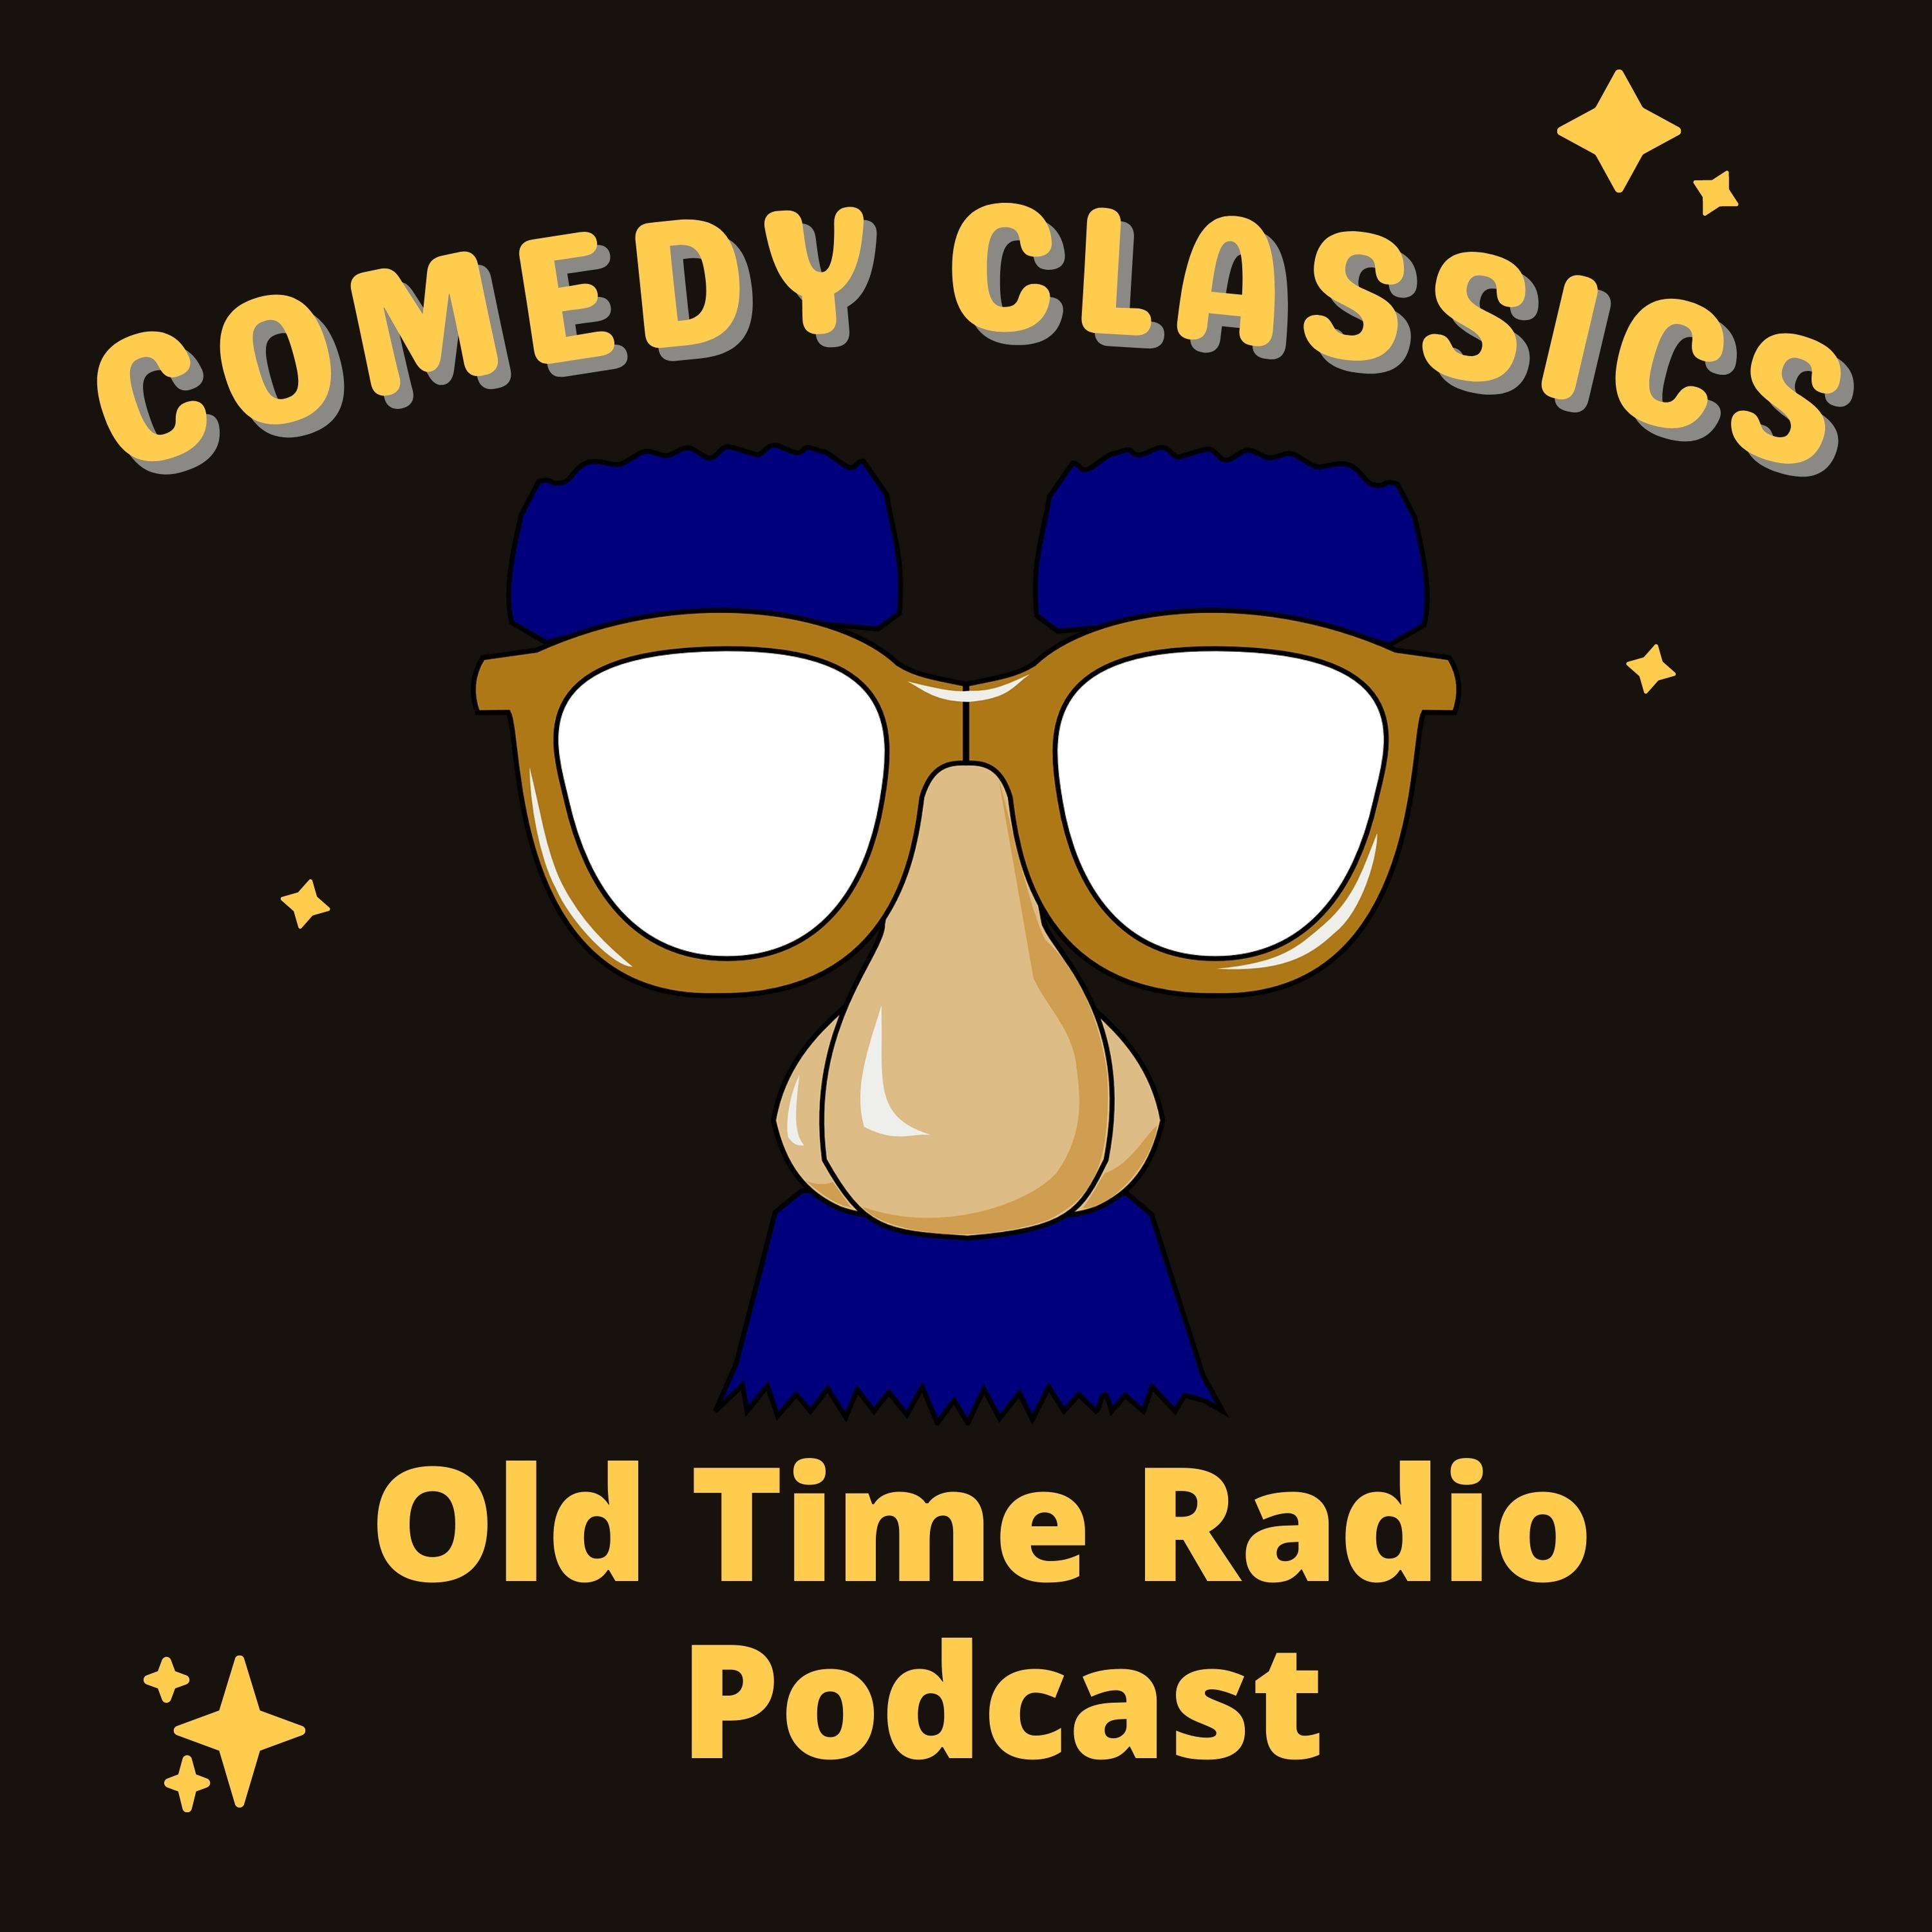  Comedy Classics Best Old Time Radio Podcast